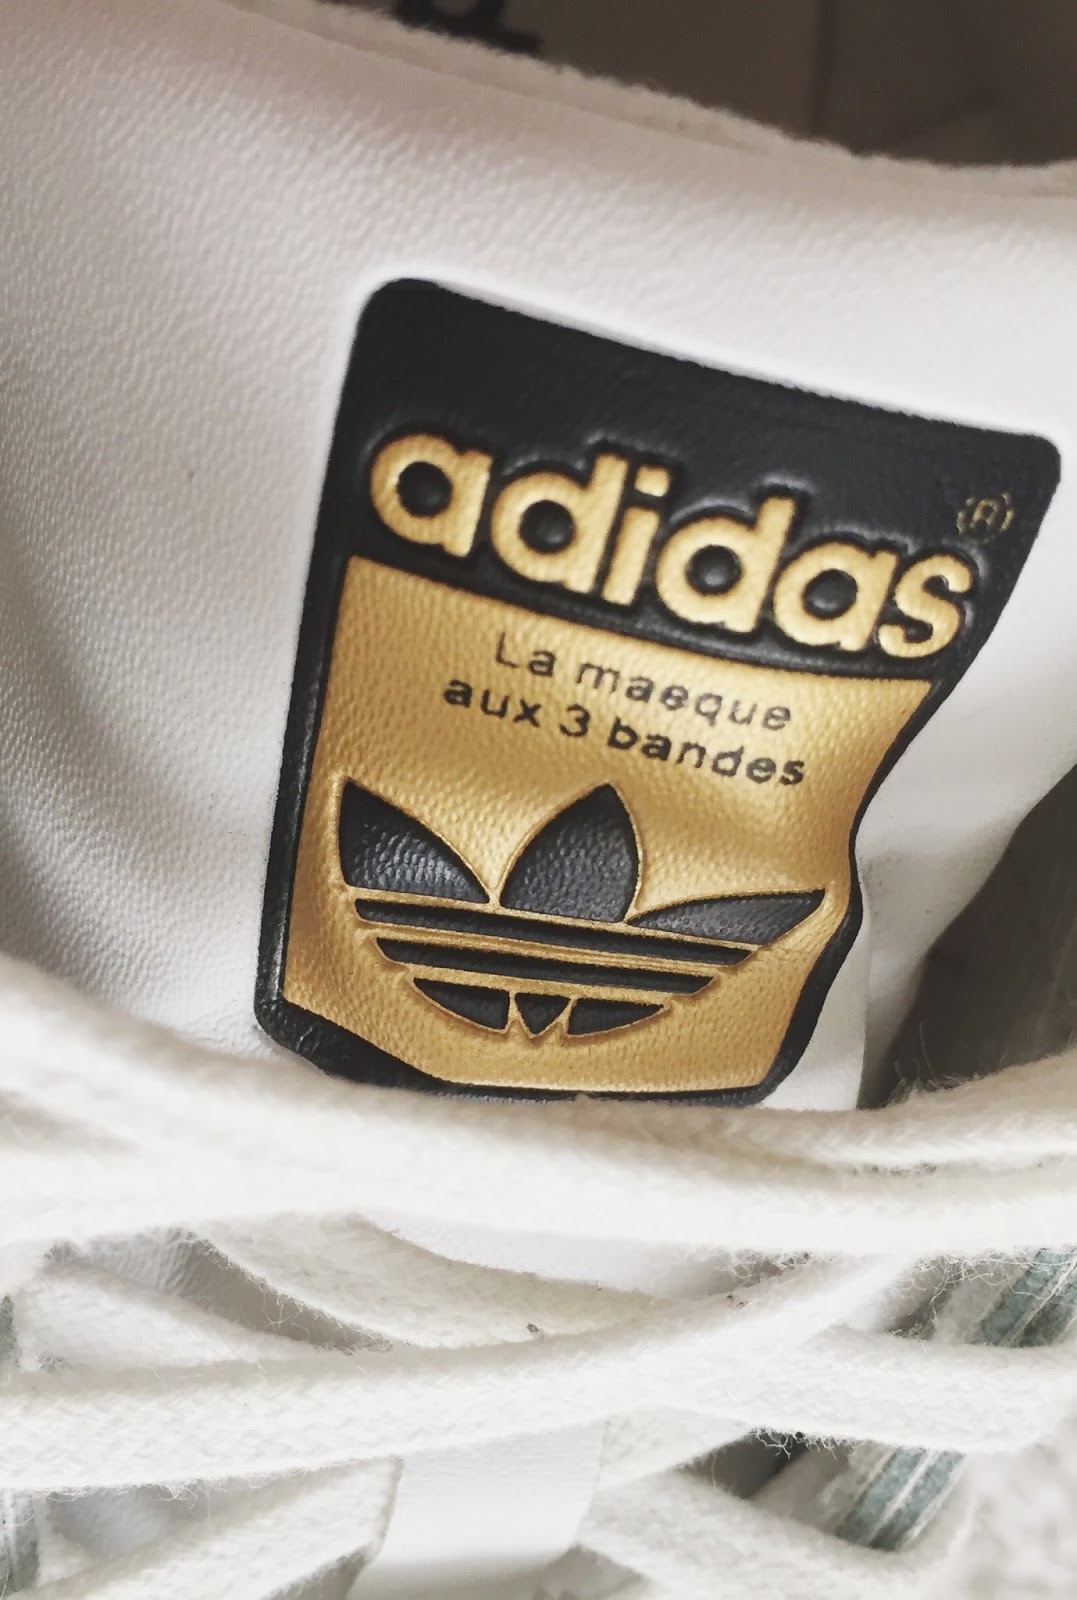 is the adidas logo on the left or right